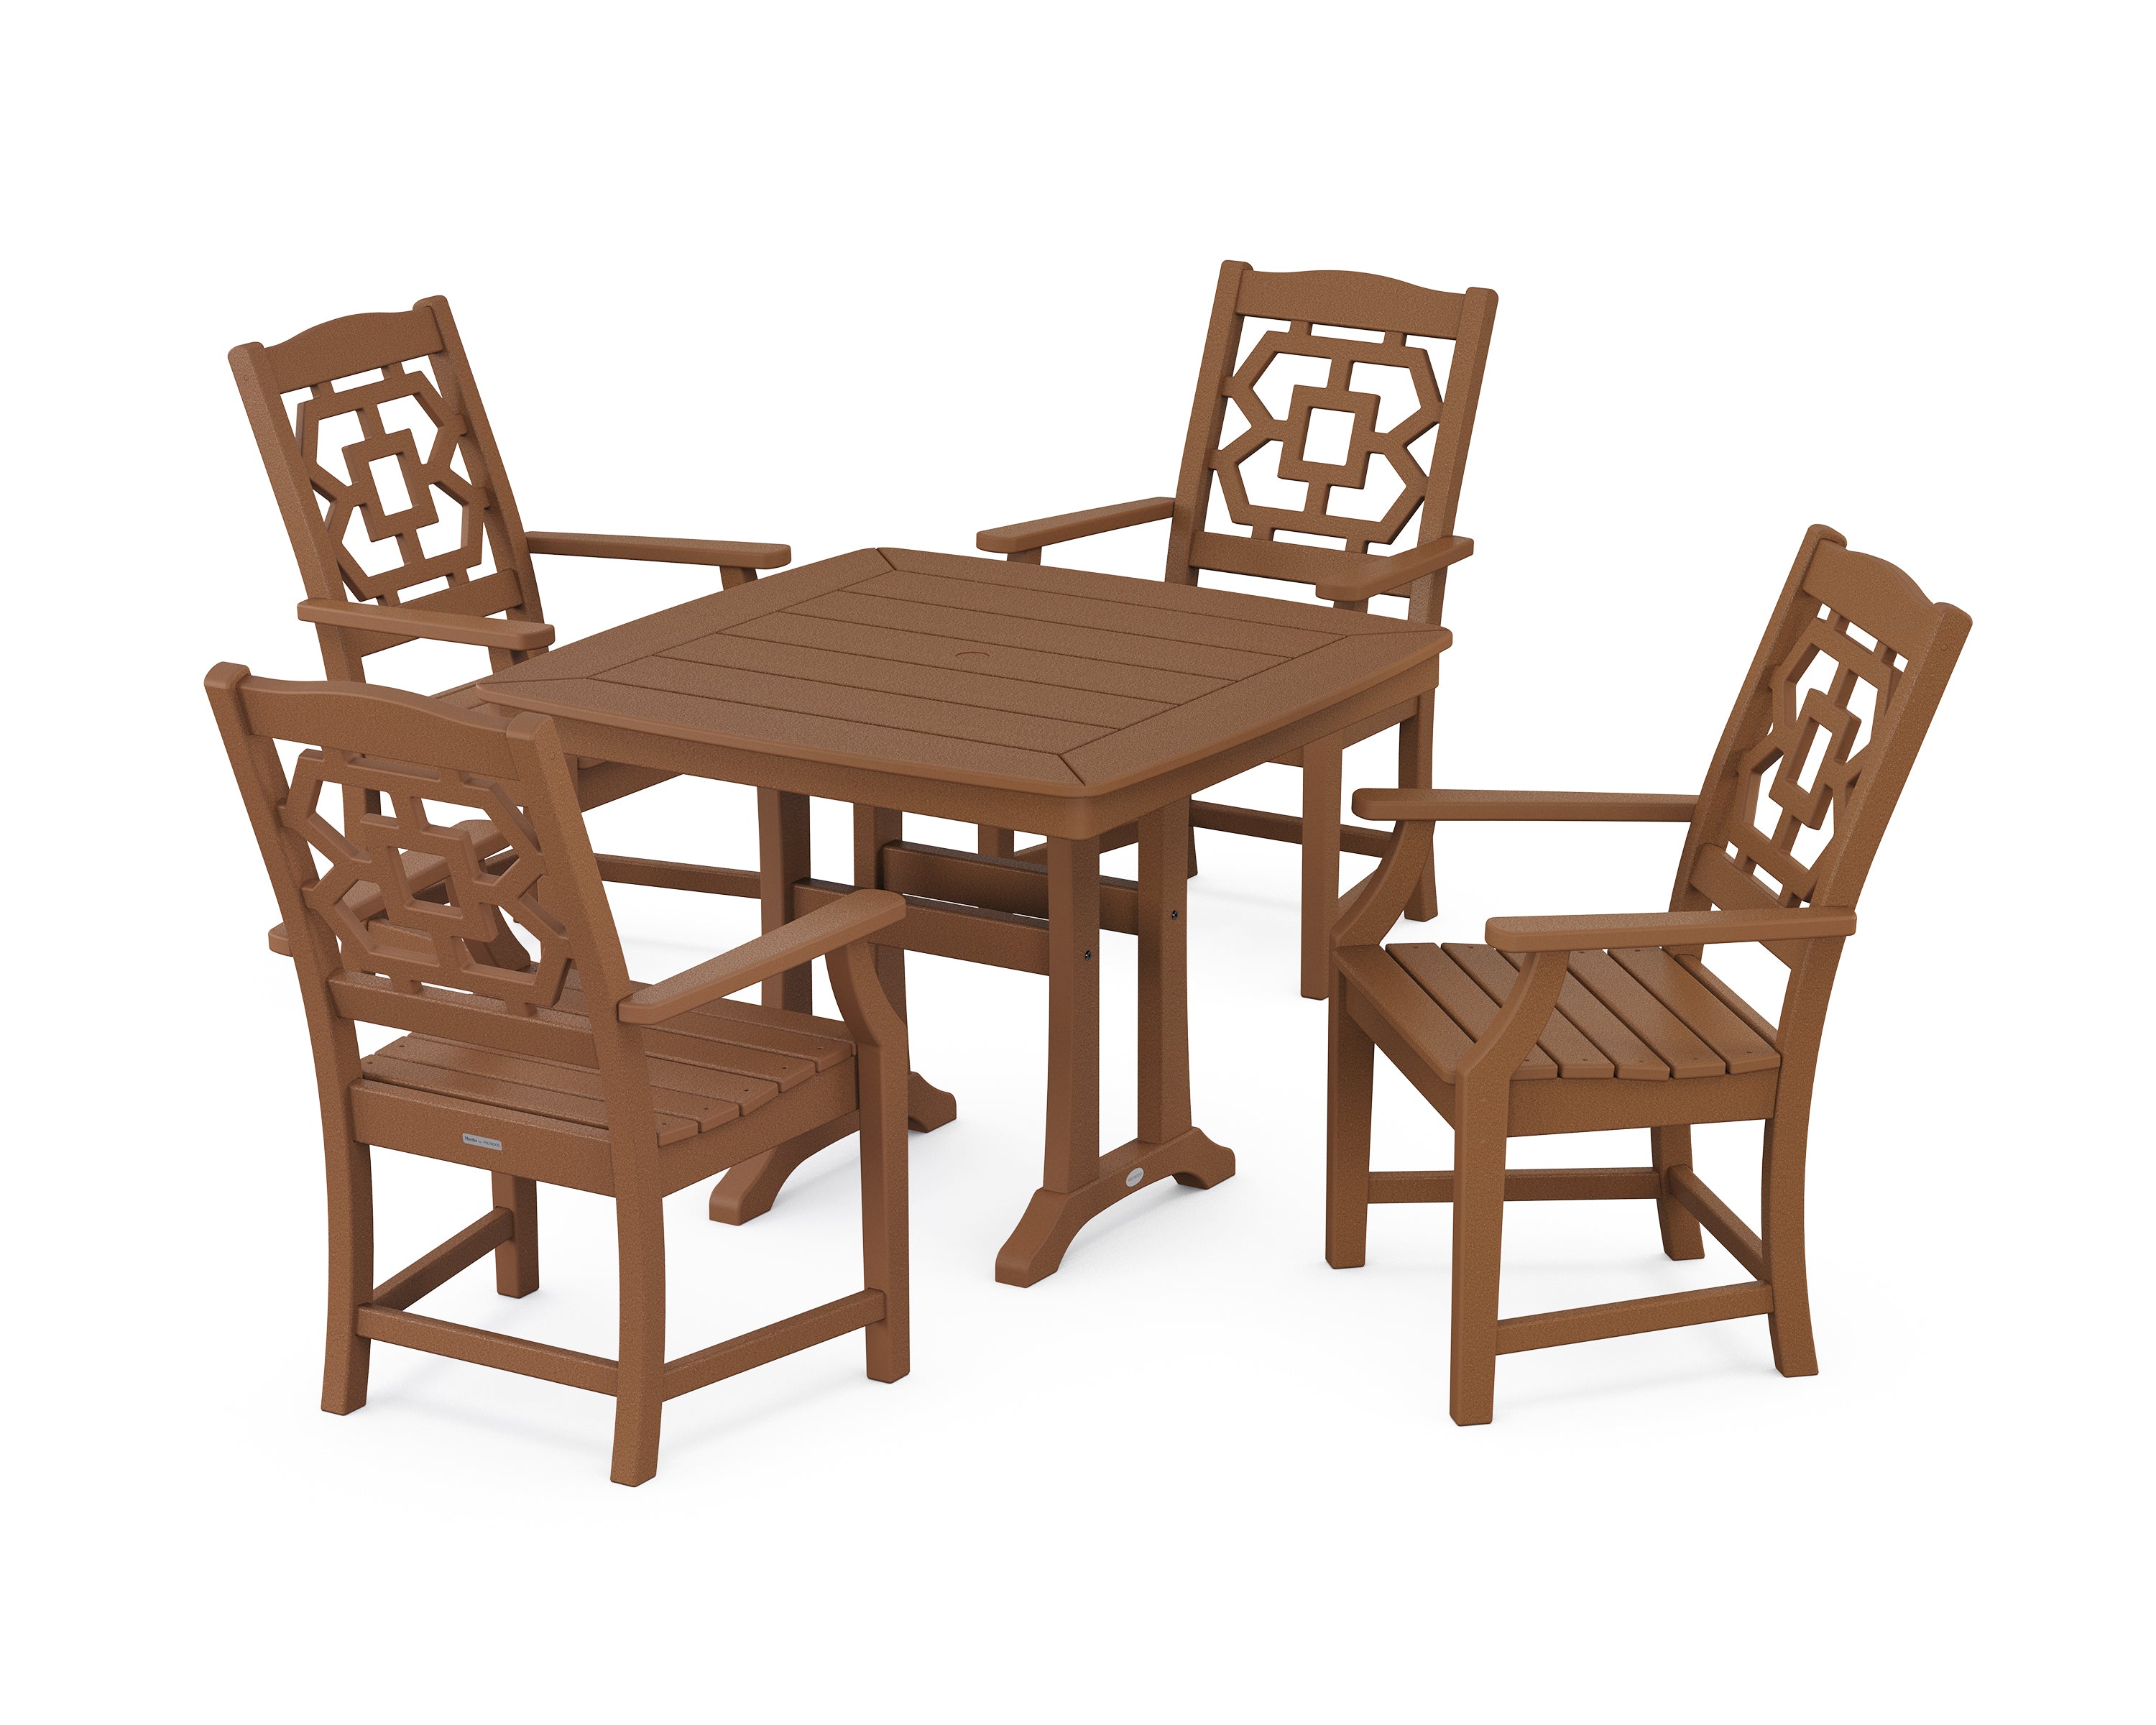 Martha Stewart by POLYWOOD® Chinoiserie 5-Piece Dining Set with Trestle Legs in Teak